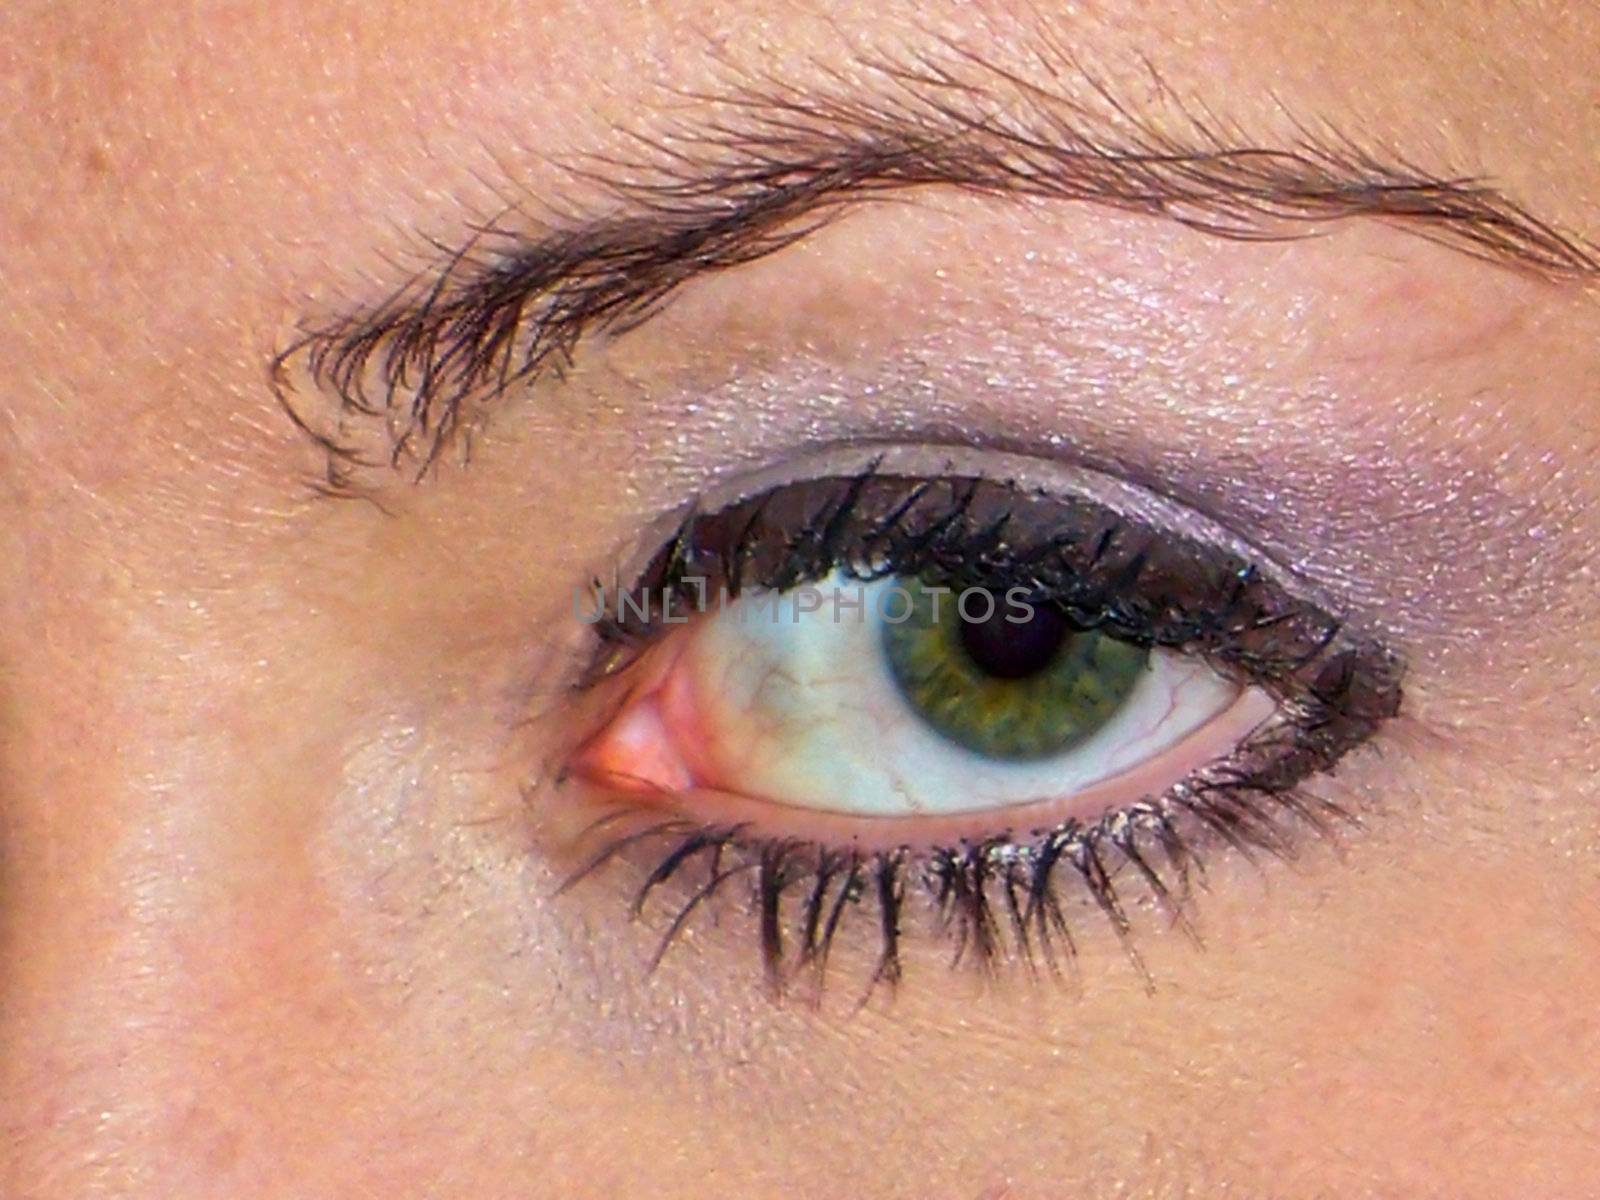 A close up of a womans eye with makeup on